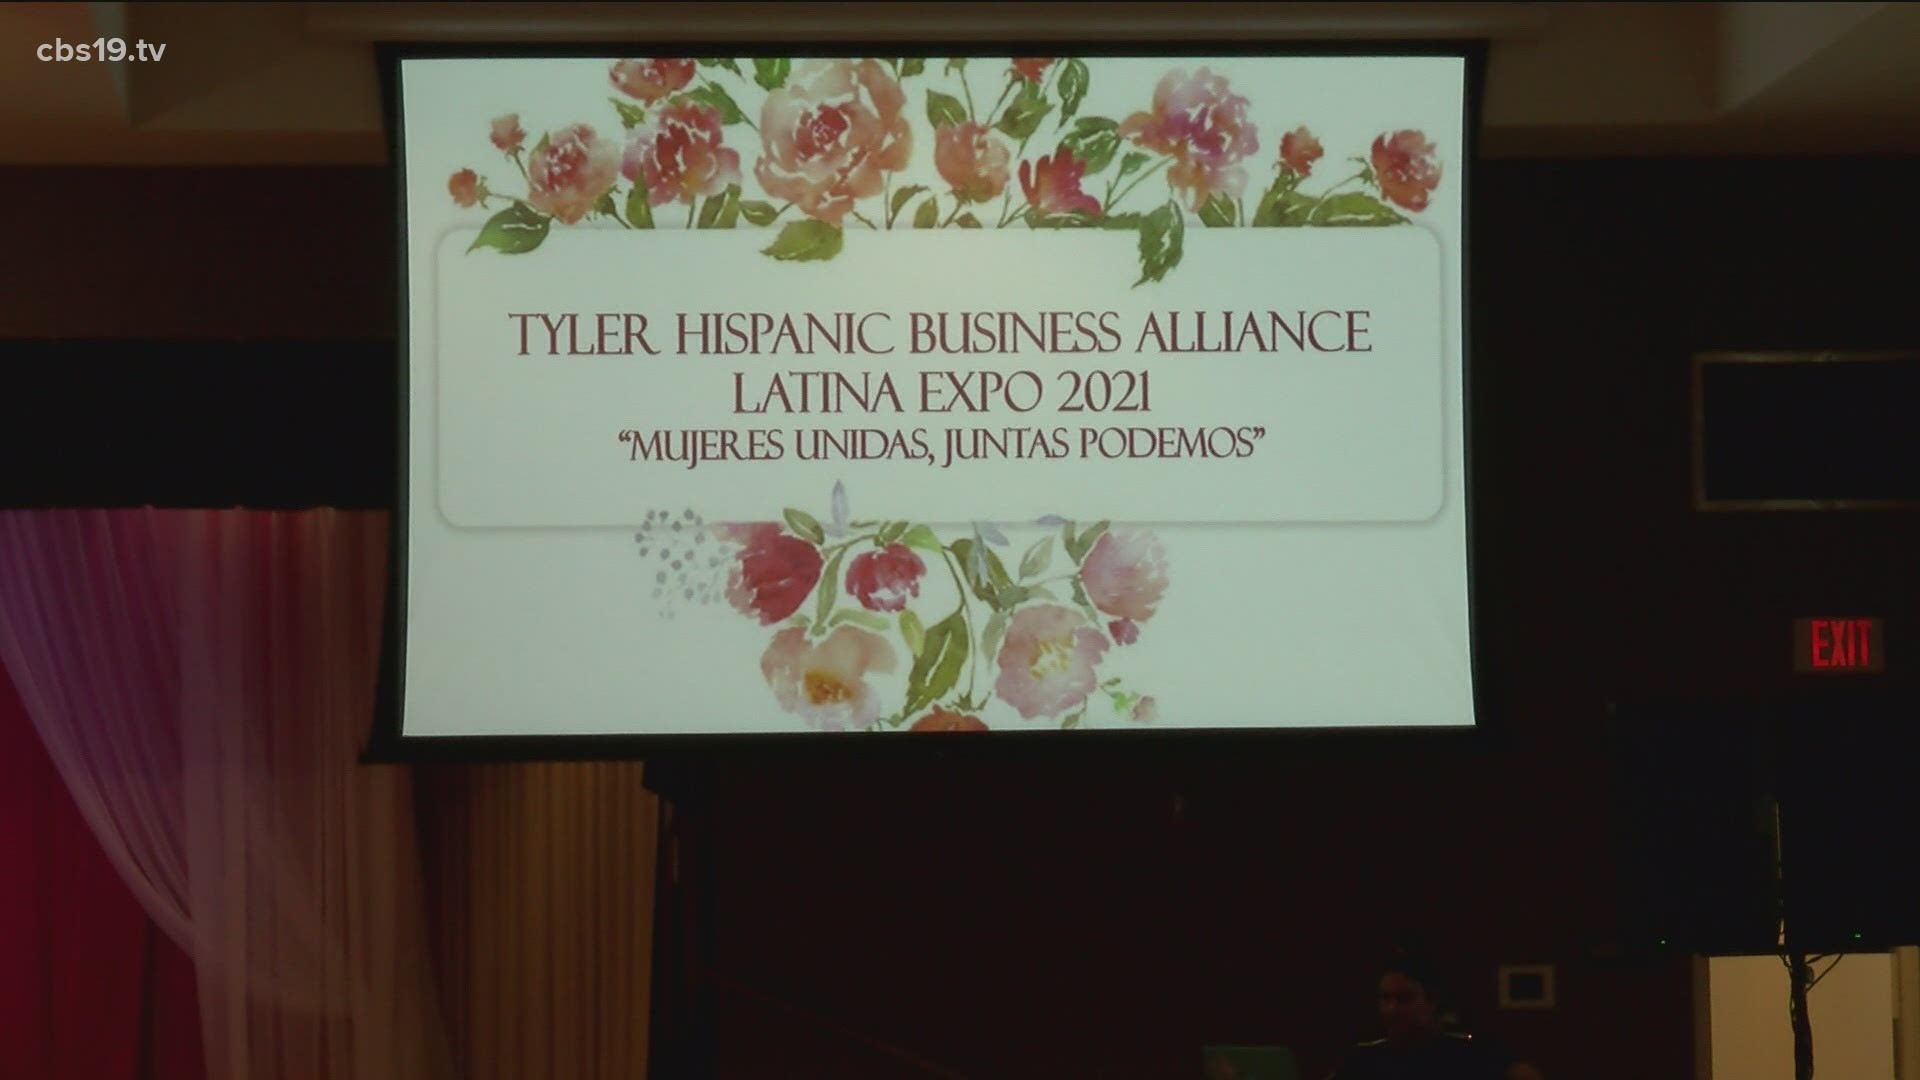 The Tyler Hispanic Business Alliance Director says that the Hispanic business alliance is able to provide resources to the fastest-growing demographic in East Texas.